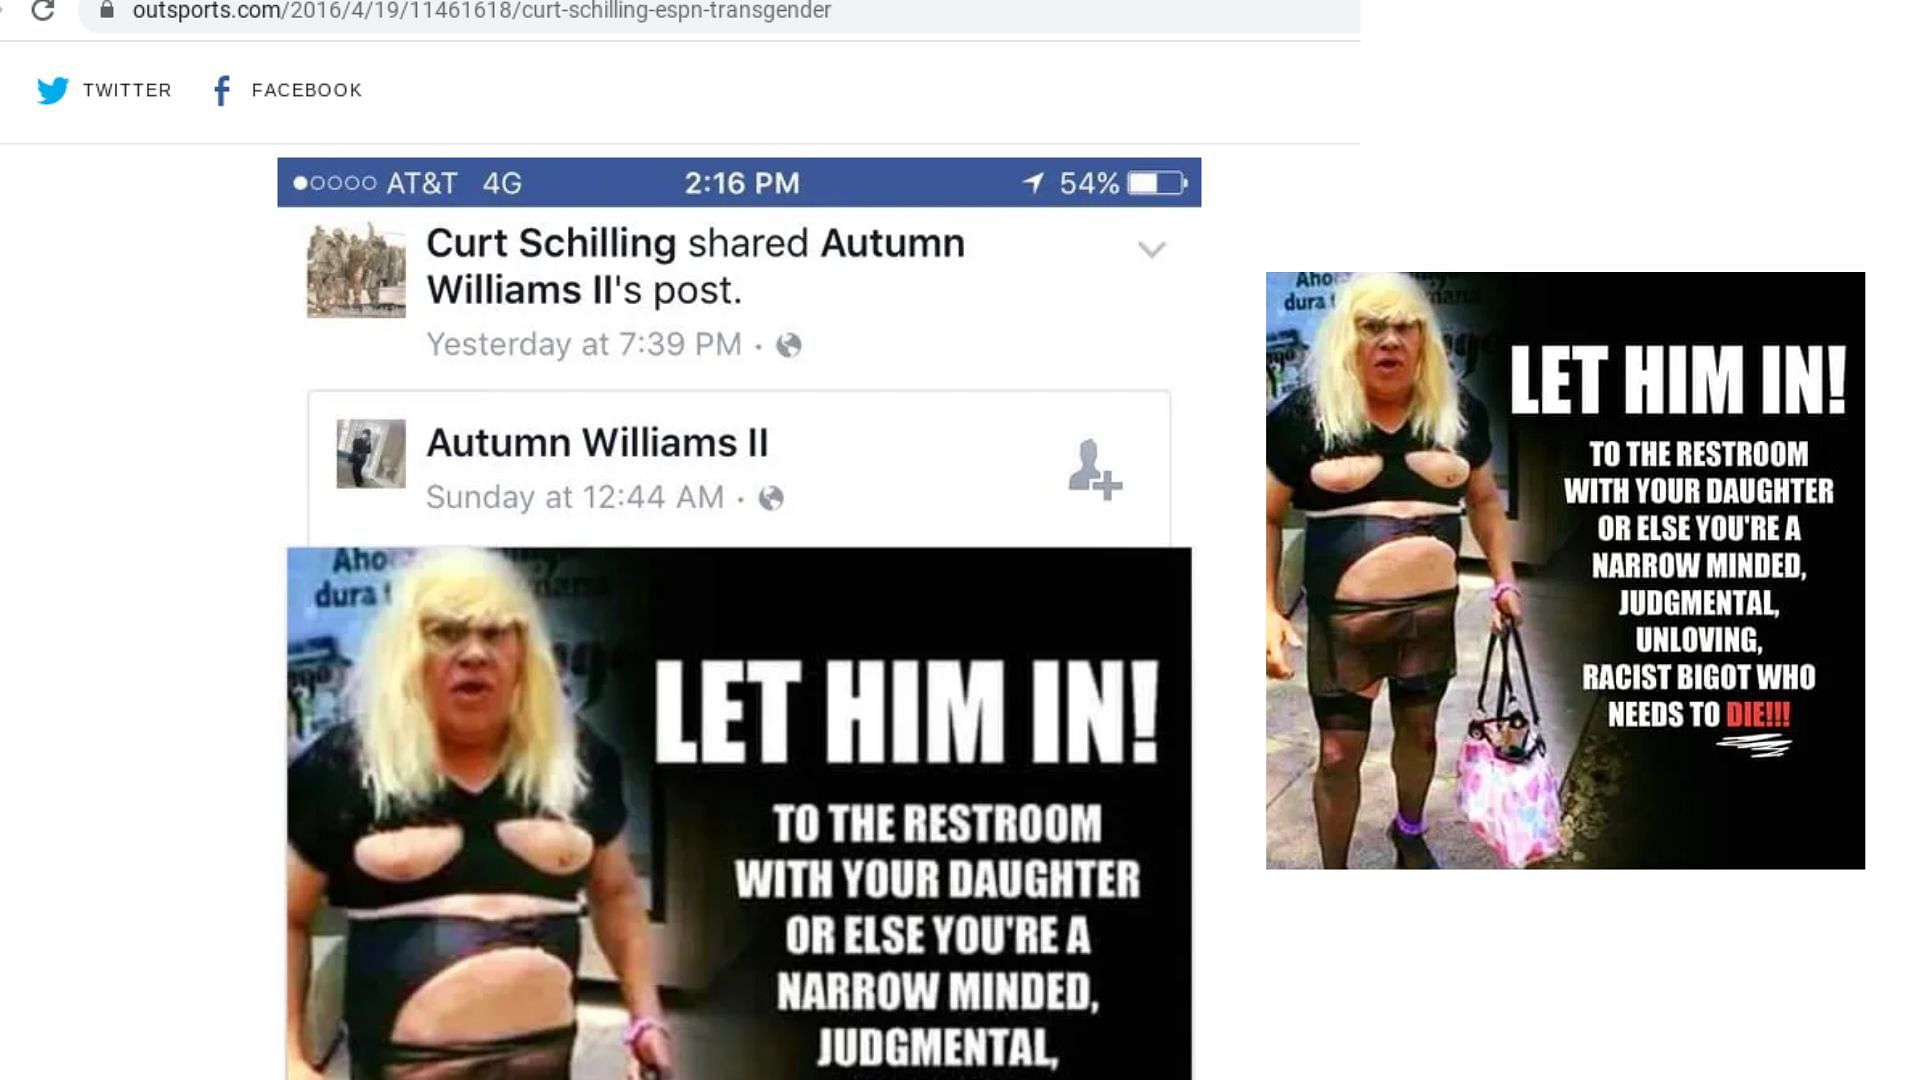 Deleted Facebook post of Curt shared by Outsports.